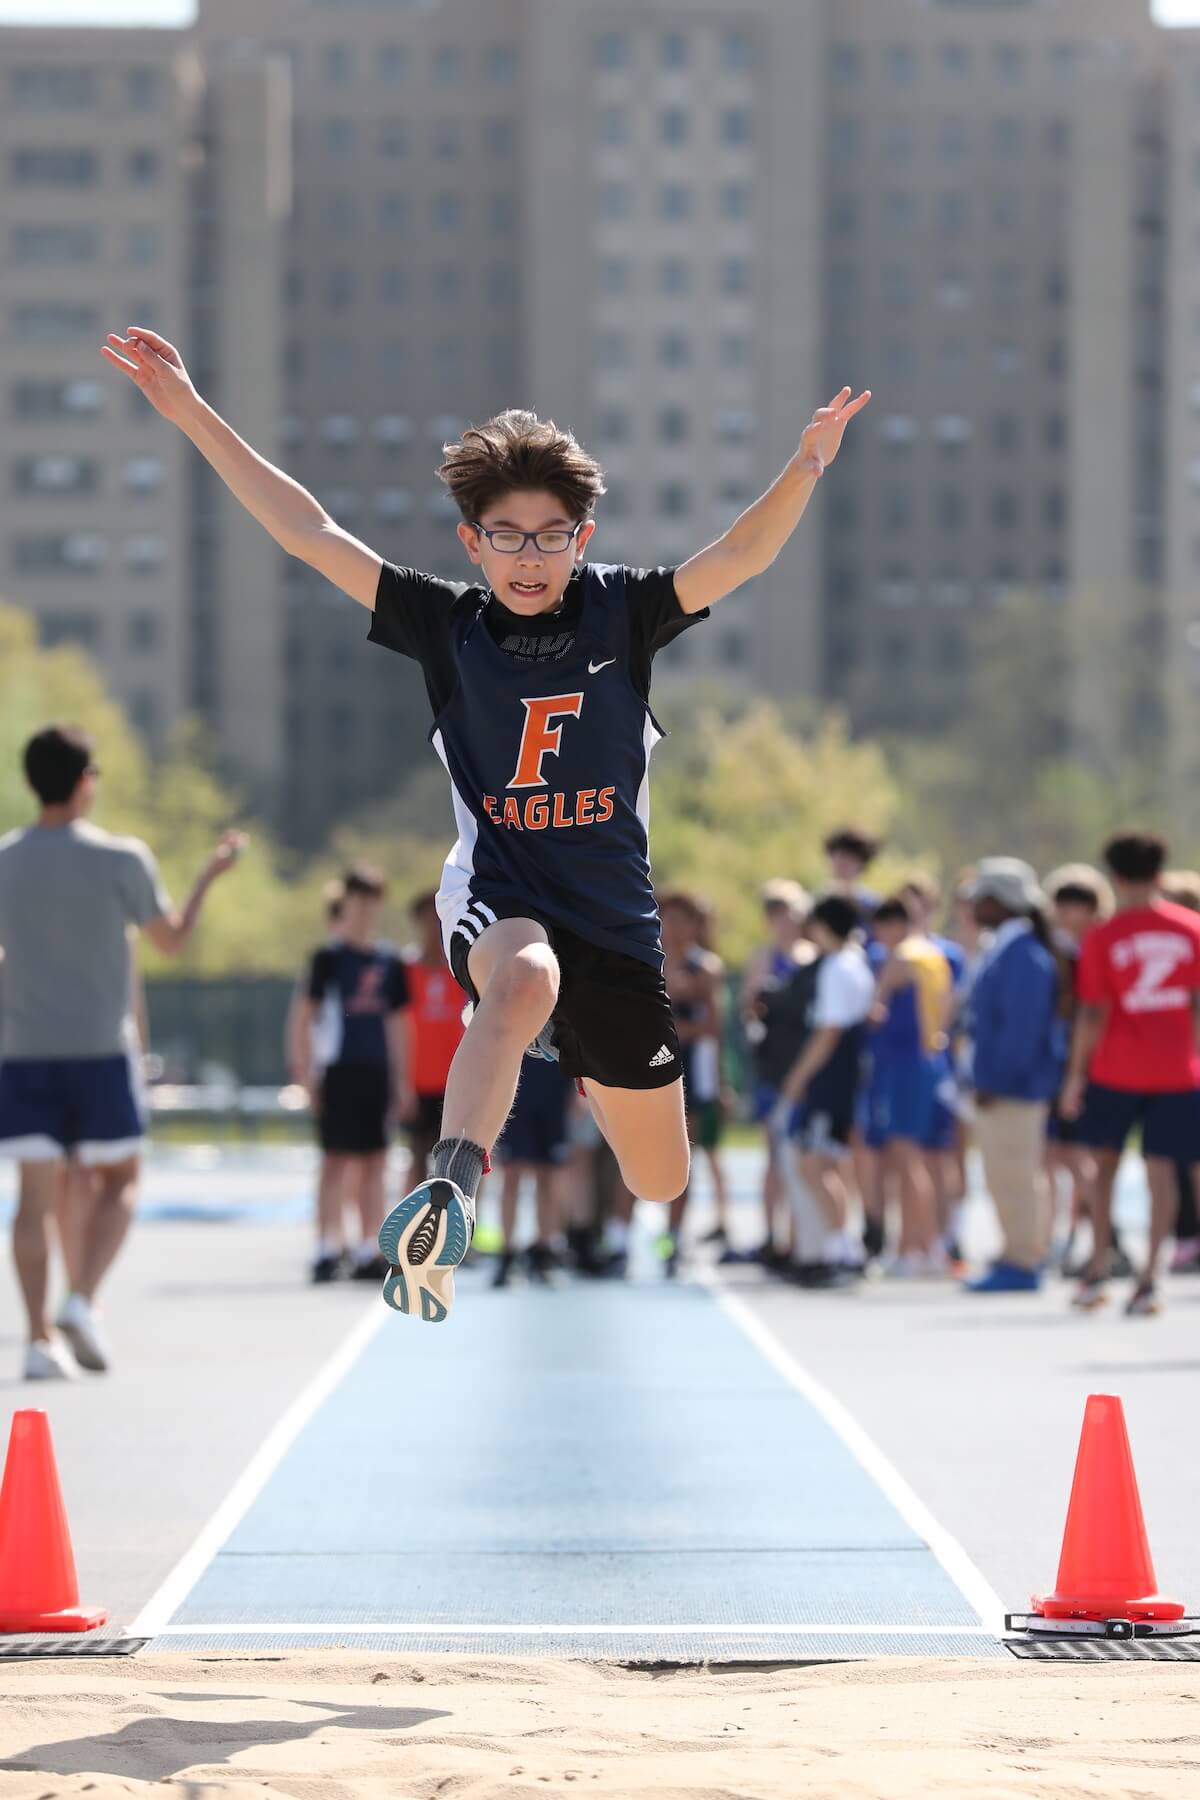 Ethical Culture Fieldston School Middle School track and field student is captured mid-air during a long jump